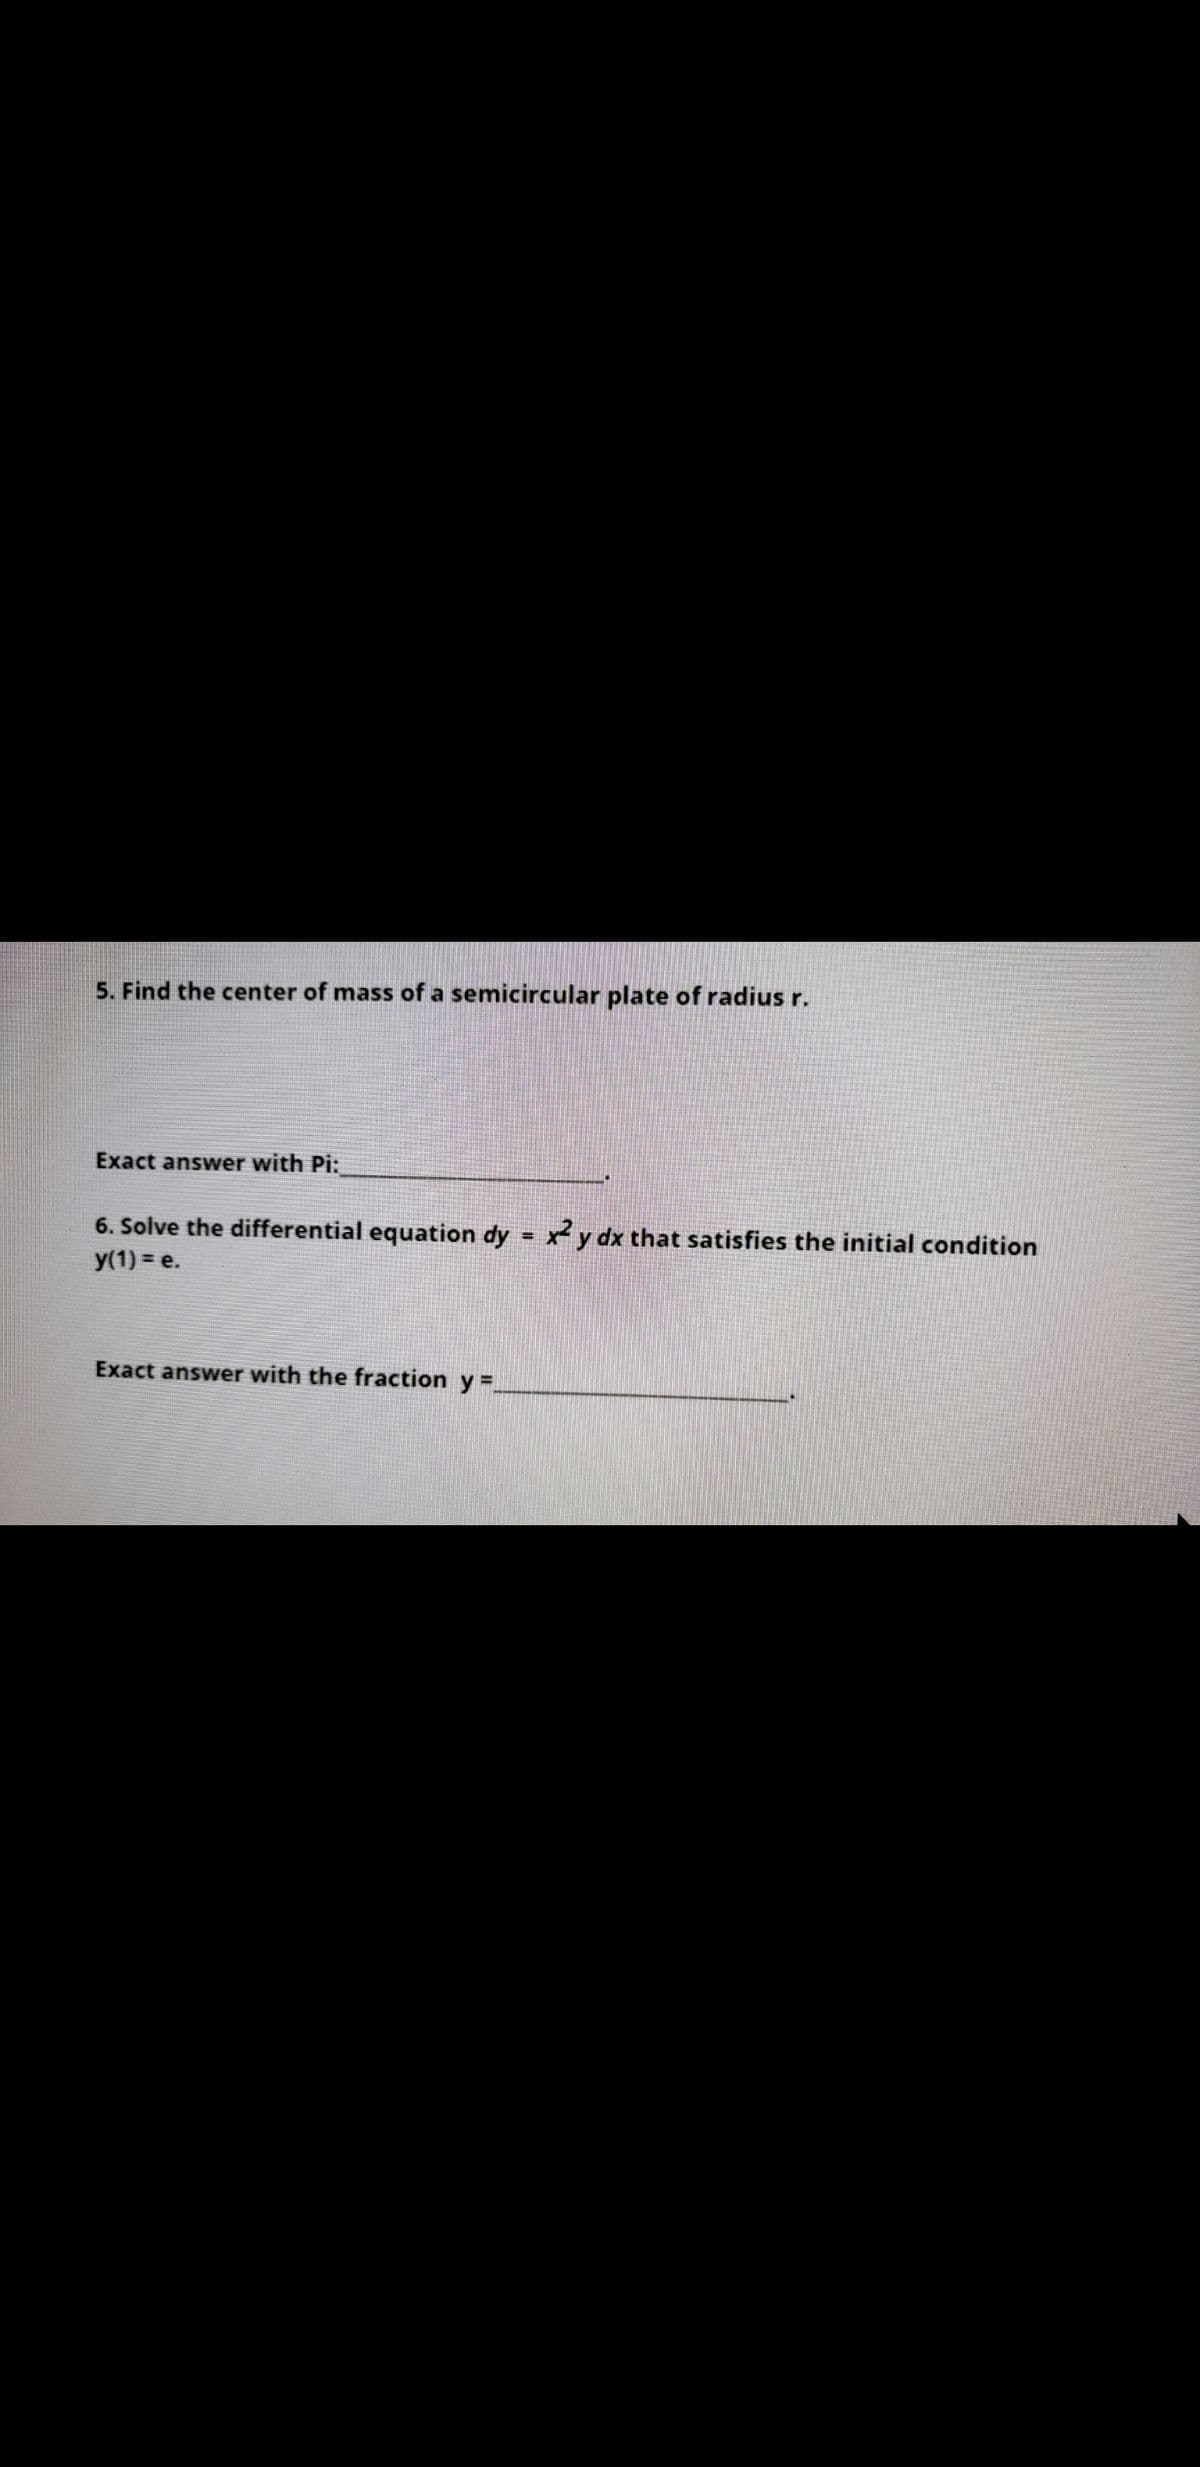 5. Find the center of mass of a semicircular plate of radius r.
Exact answer with Pi:
6. Solve the differential equation dy = x y dx that satisfies the initial condition
y(1) = e.
Exact answer with the fraction y =.
